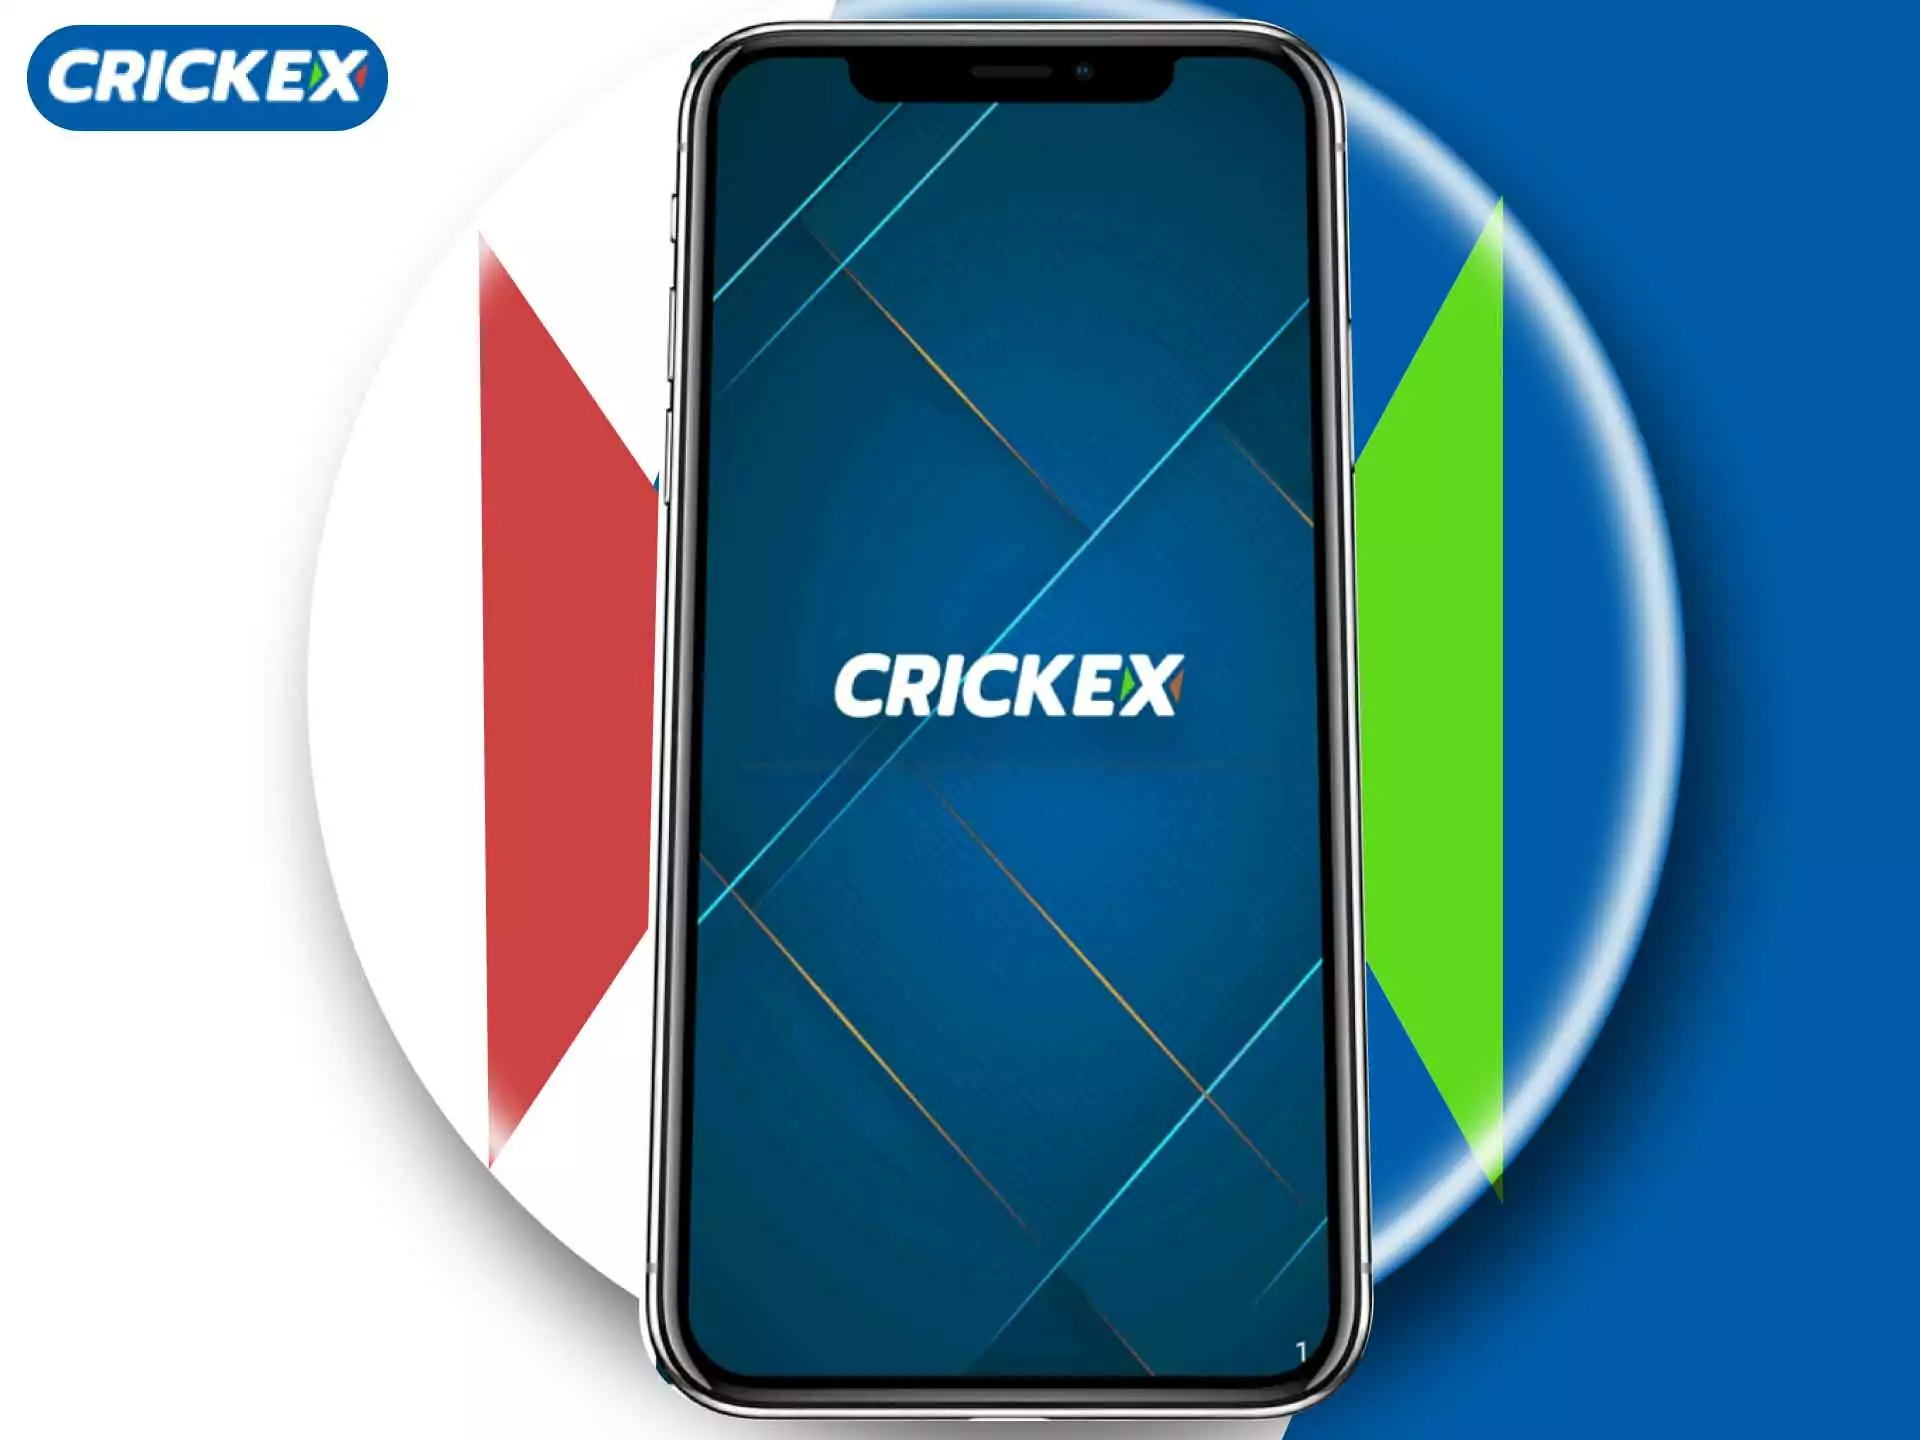 Download the Crickex app from the official website and install it on your smartphone.